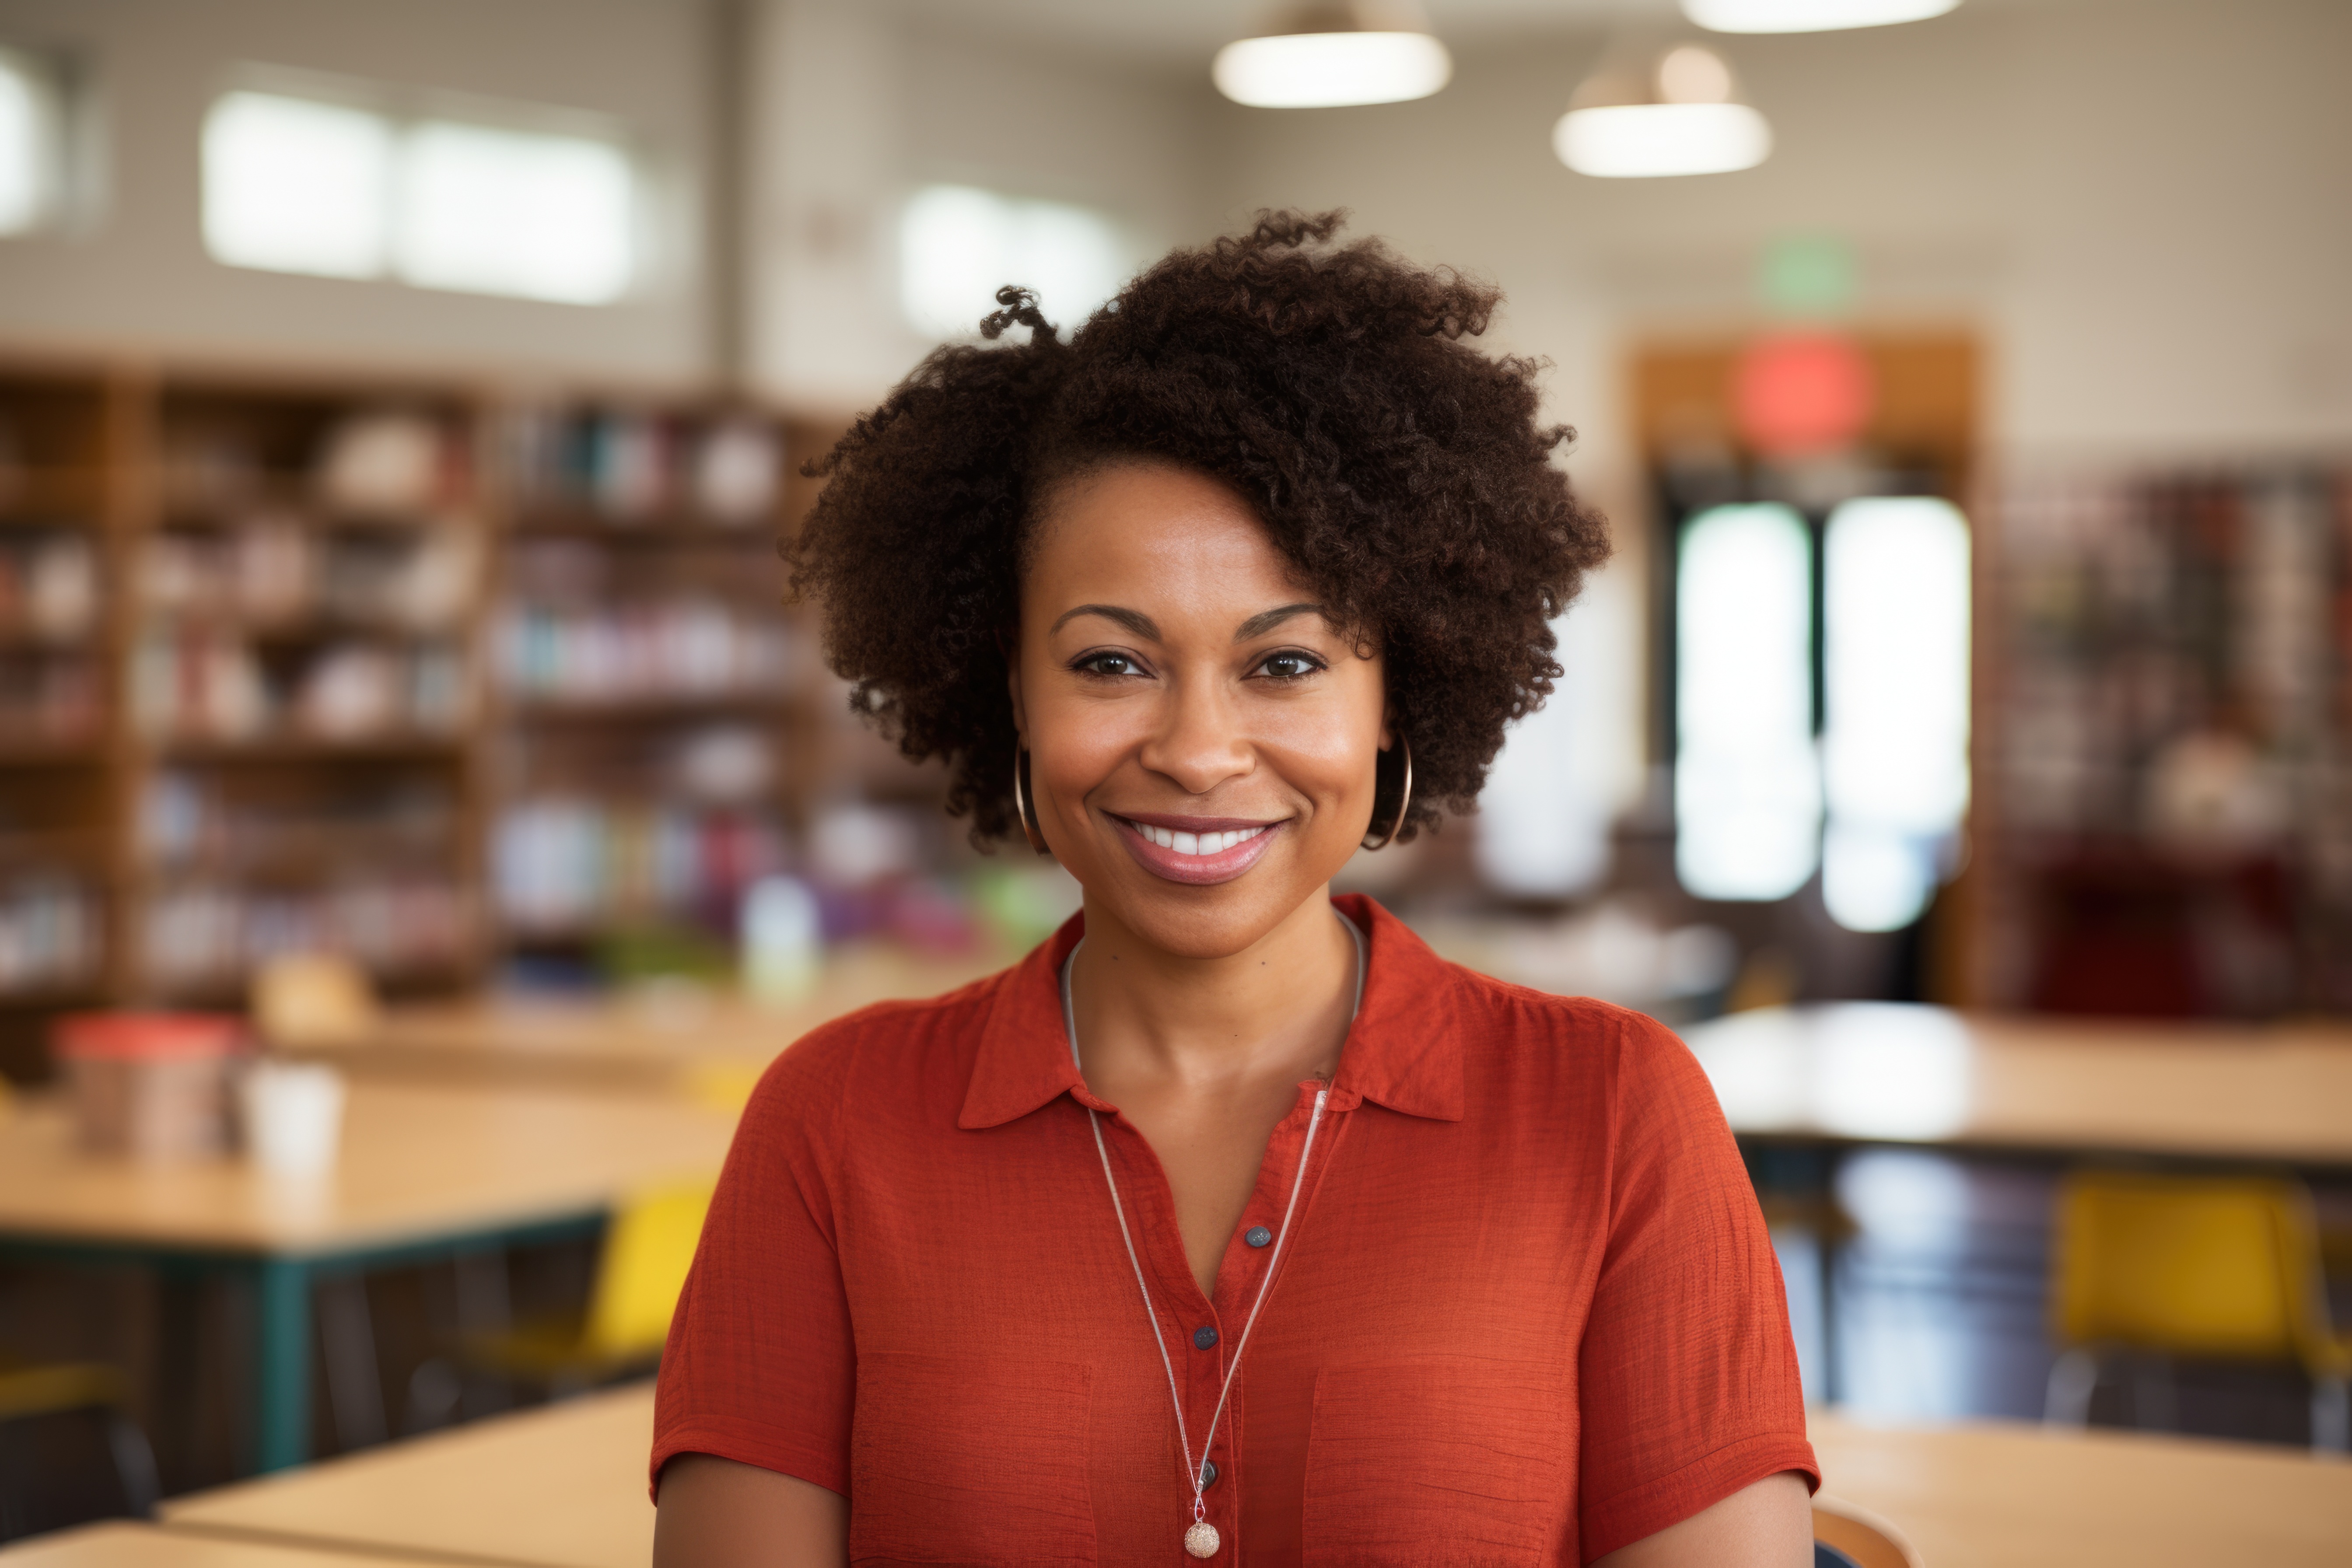 Black woman teacher smiling at the camera, standing in a school classroom